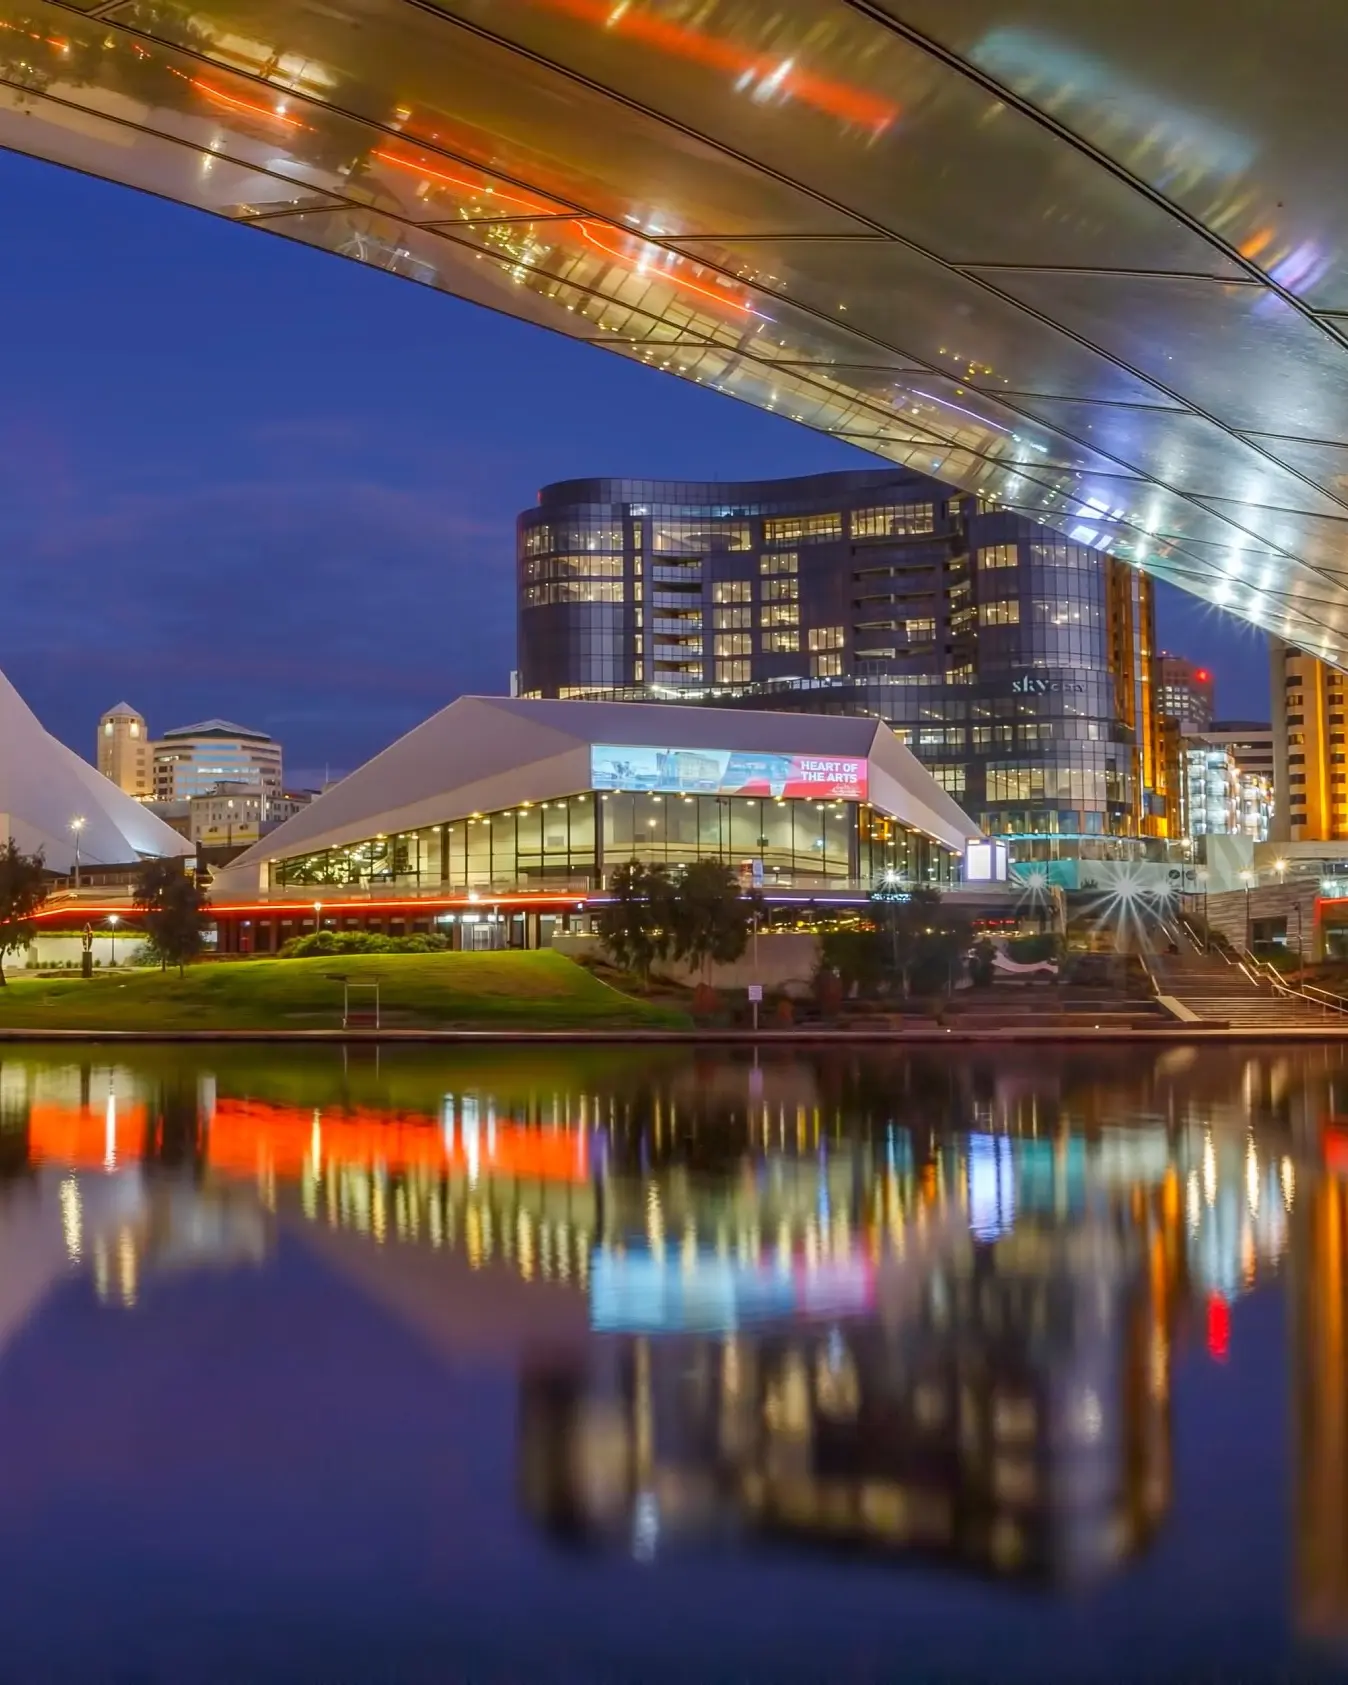 View from under the Riverbank Bridge of the Riverbank Precinct skyline at night and its reflection on the River Torrens, Adelaide. Image credit: South Australia Tourism Commission